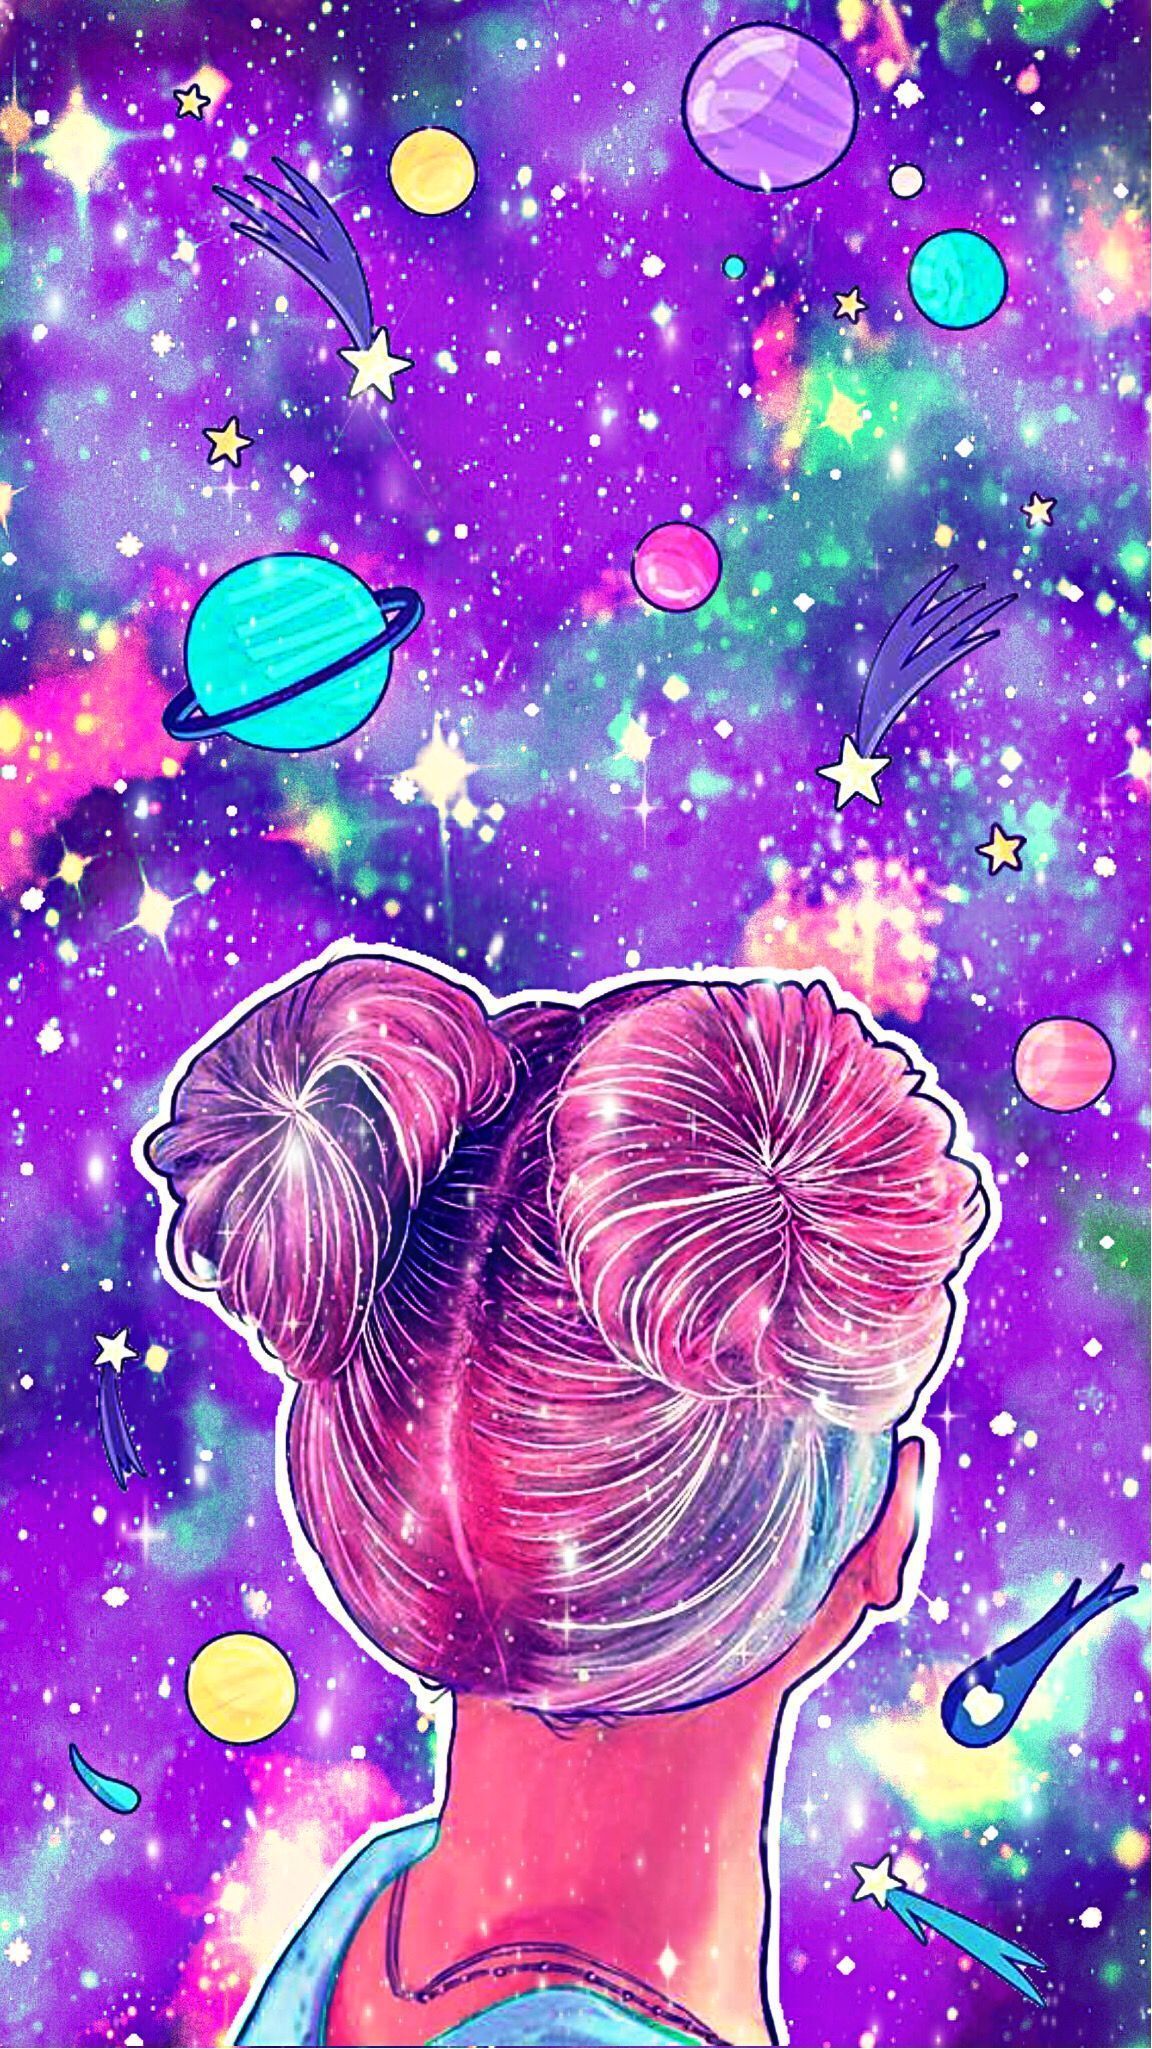 Girl Planet Galaxy #androidwallpaper #iphonewallpaper #glitter #sparkle # galaxy #space #planets. Cute galaxy wallpaper, Unicorn wallpaper, Cute wallpaper